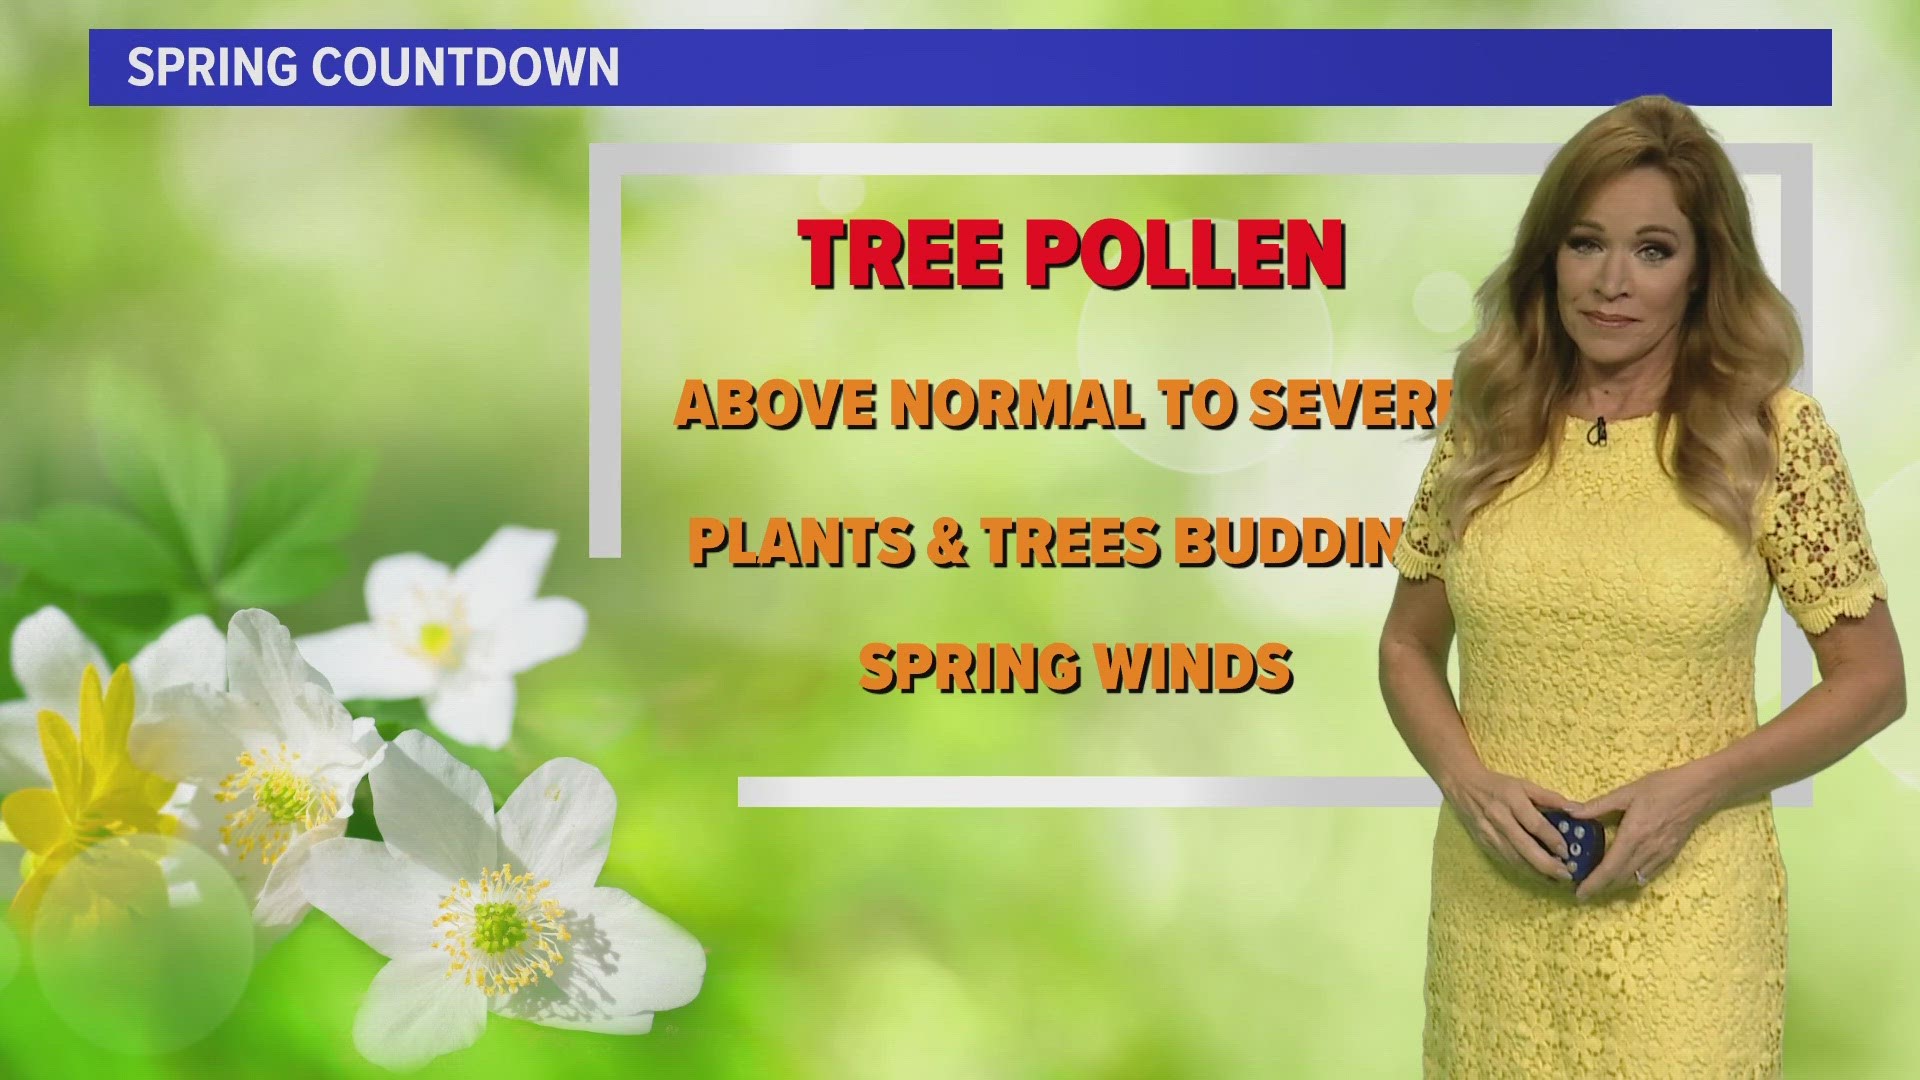 As we look forward to warm days and mild nights, spring is also synonymous with allergies. From New Jersey to Arizona, tree pollen is expected to be intense.